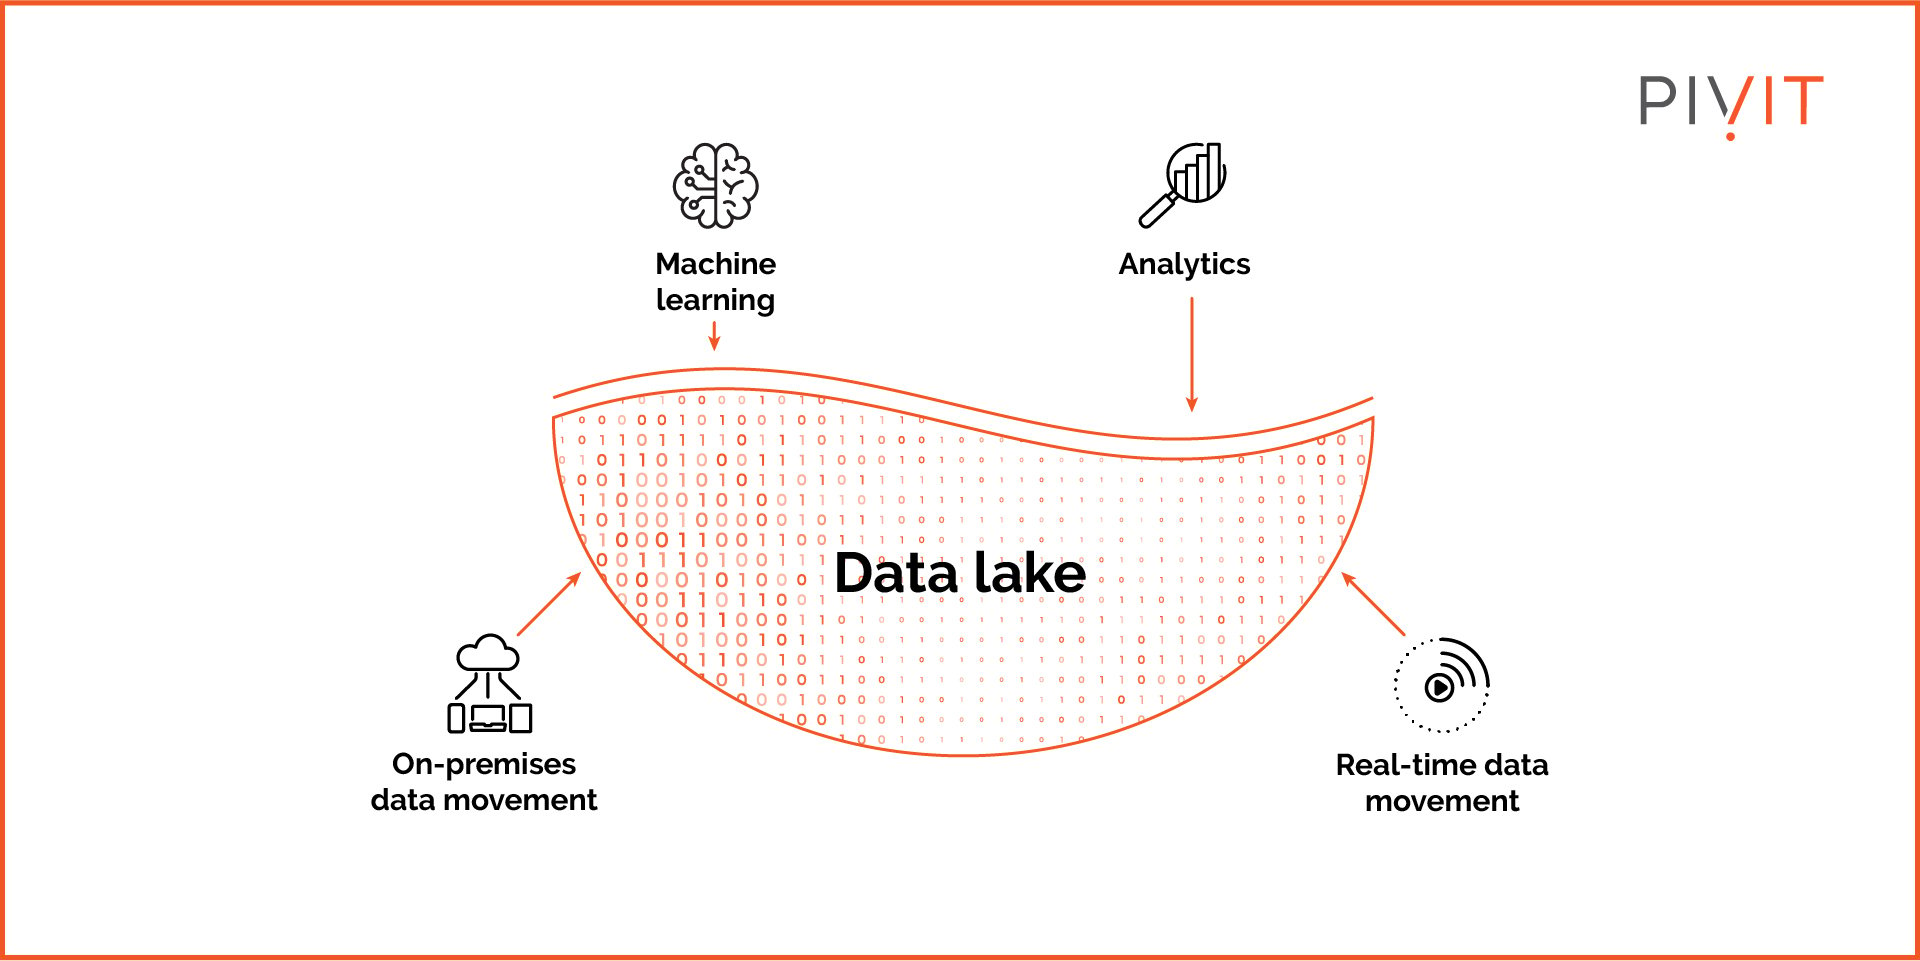 Data lake components combining machine learning, analytics, on-premises data movement, and real-time data movement